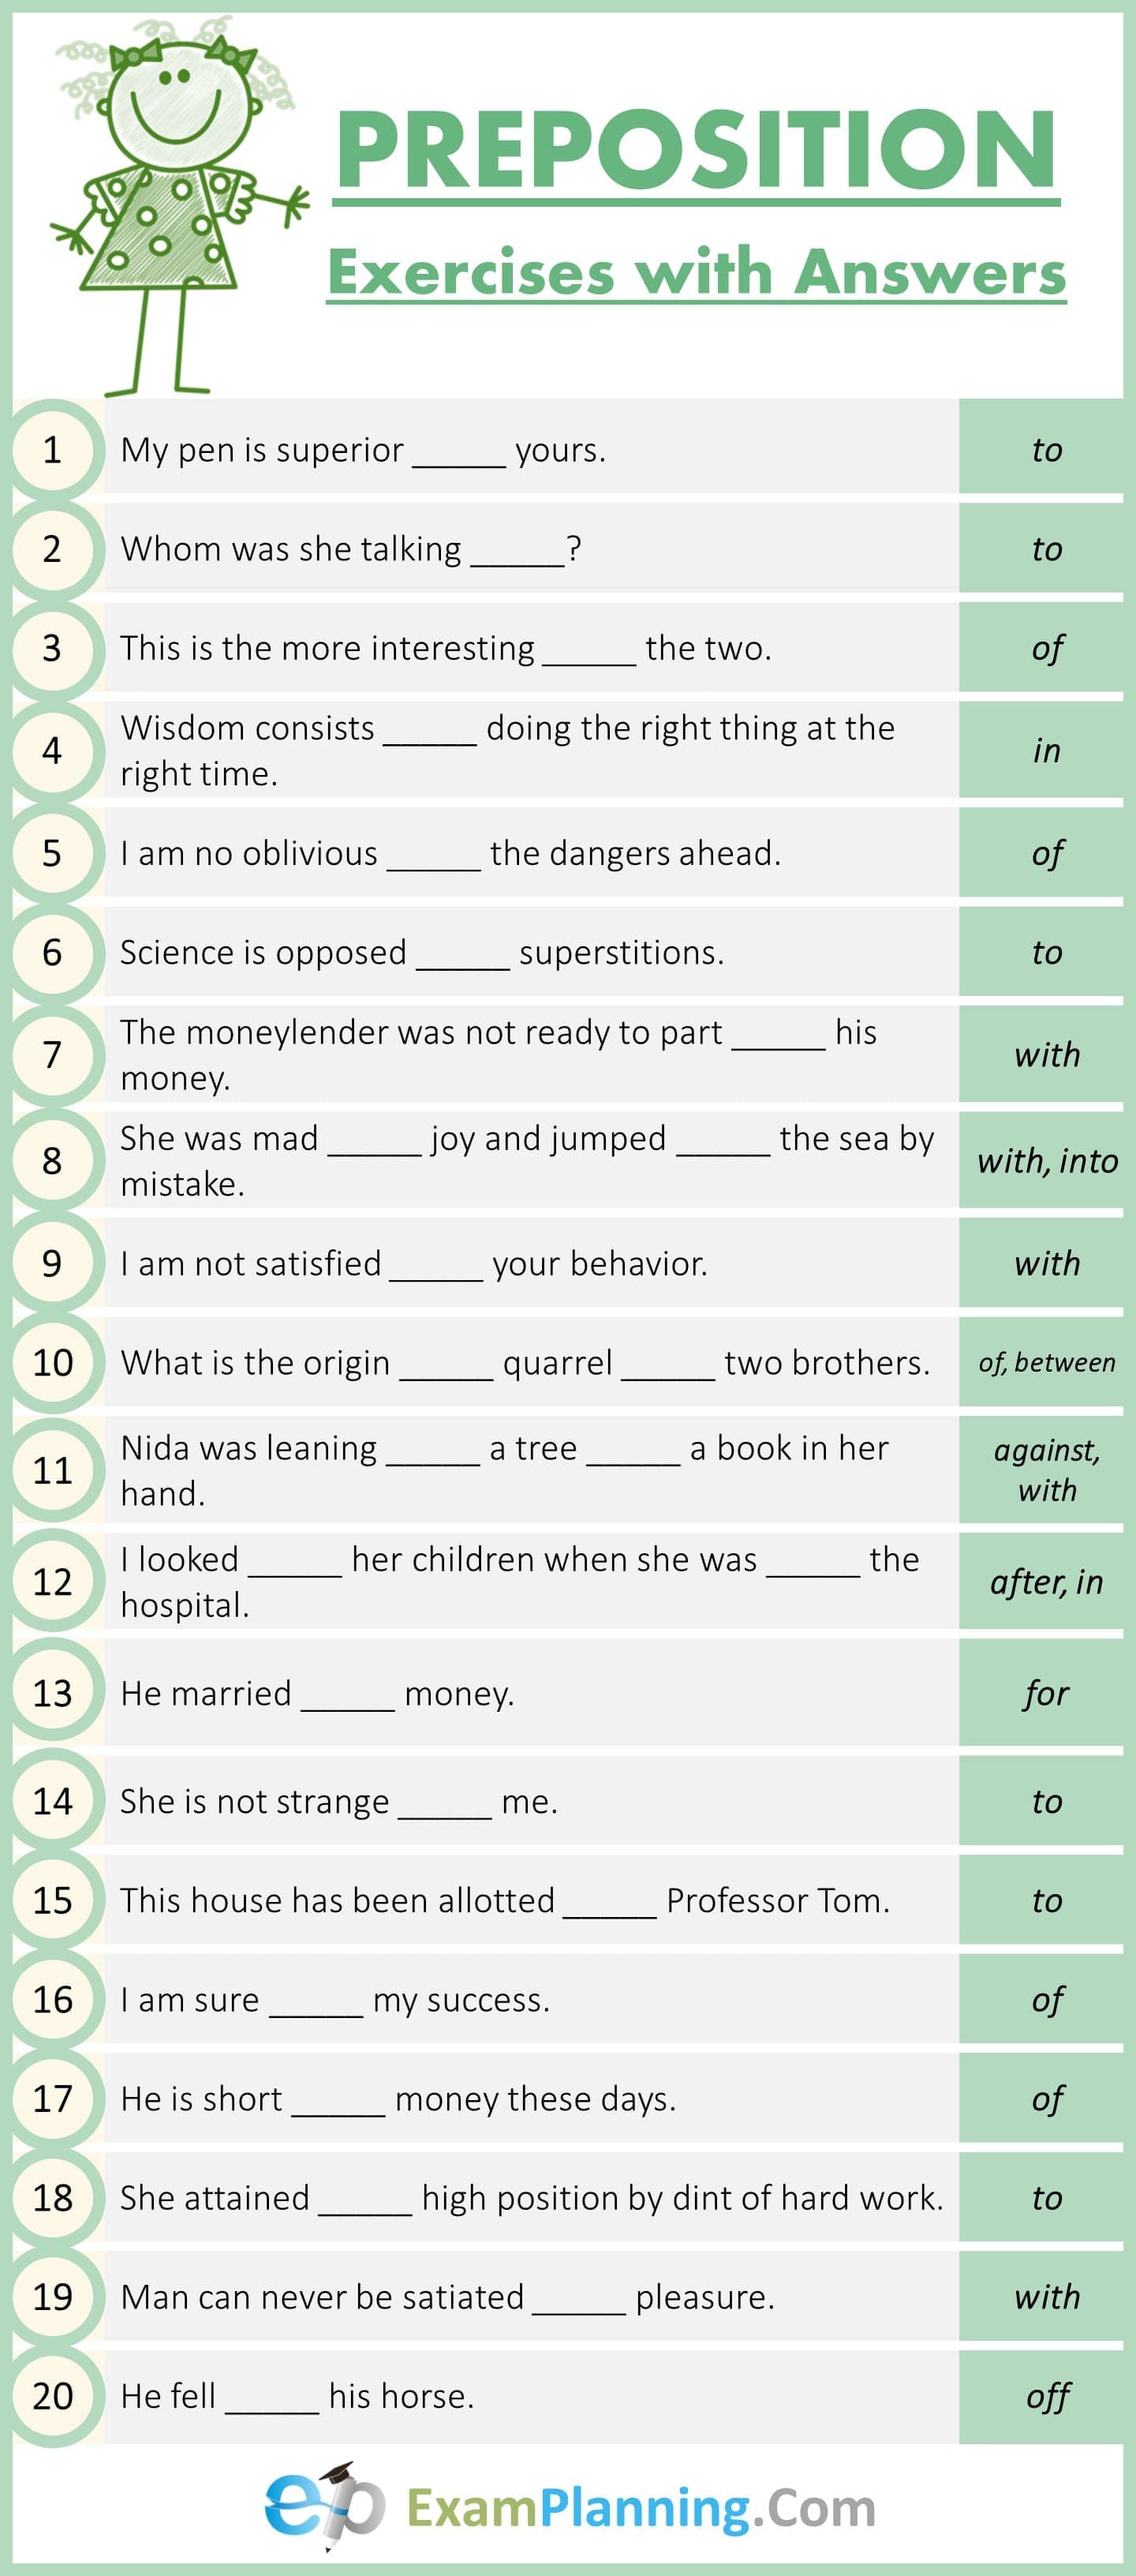 Mixed Preposition Exercises With Answers ExamPlanning